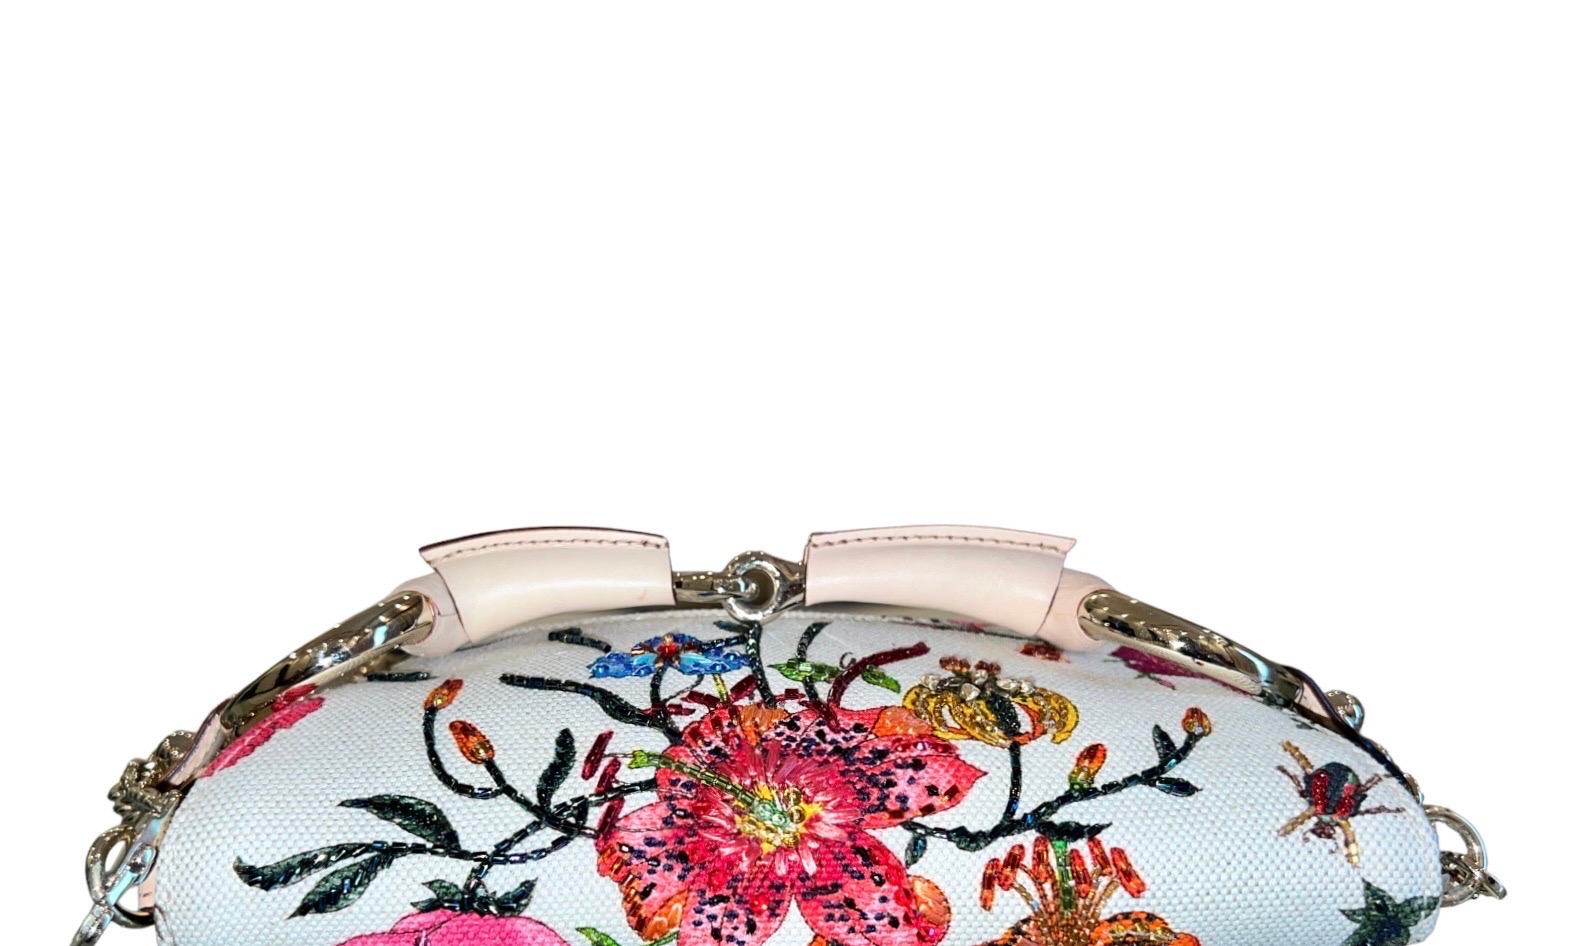 UNWORN Gucci Limited Edition Flora Print Beaded Embroidered Horsebit Bag Clutch In Excellent Condition For Sale In Switzerland, CH